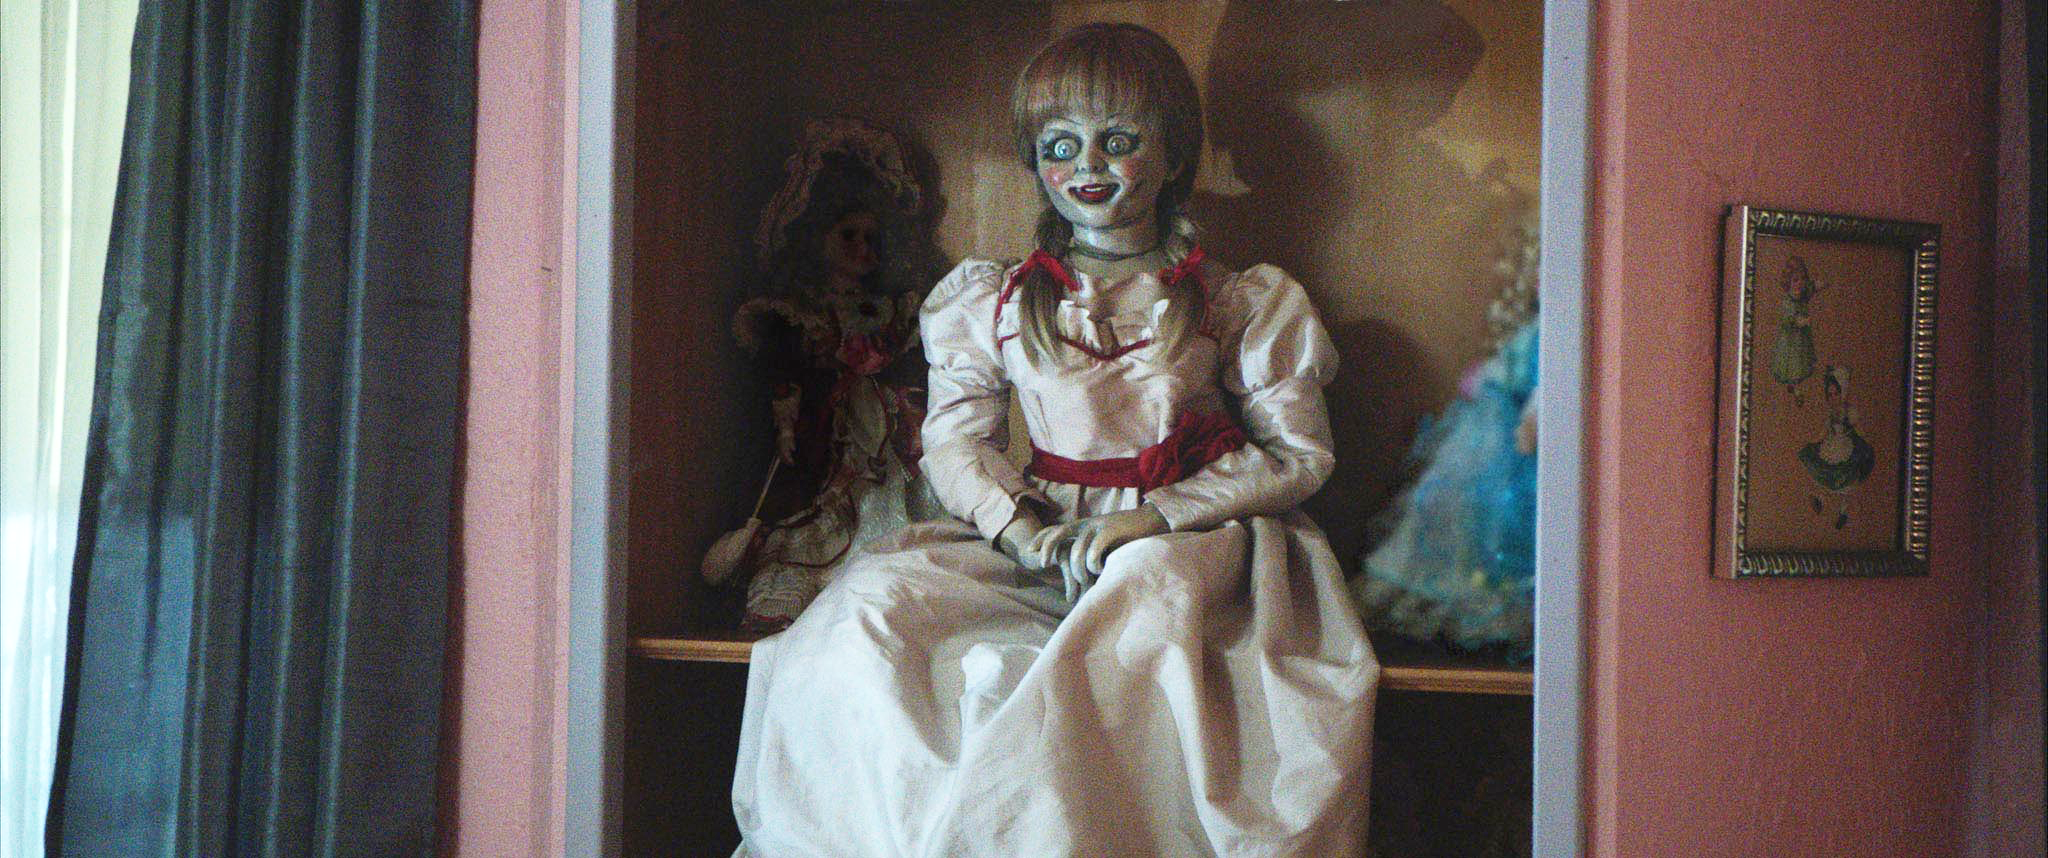 scary puppet doll